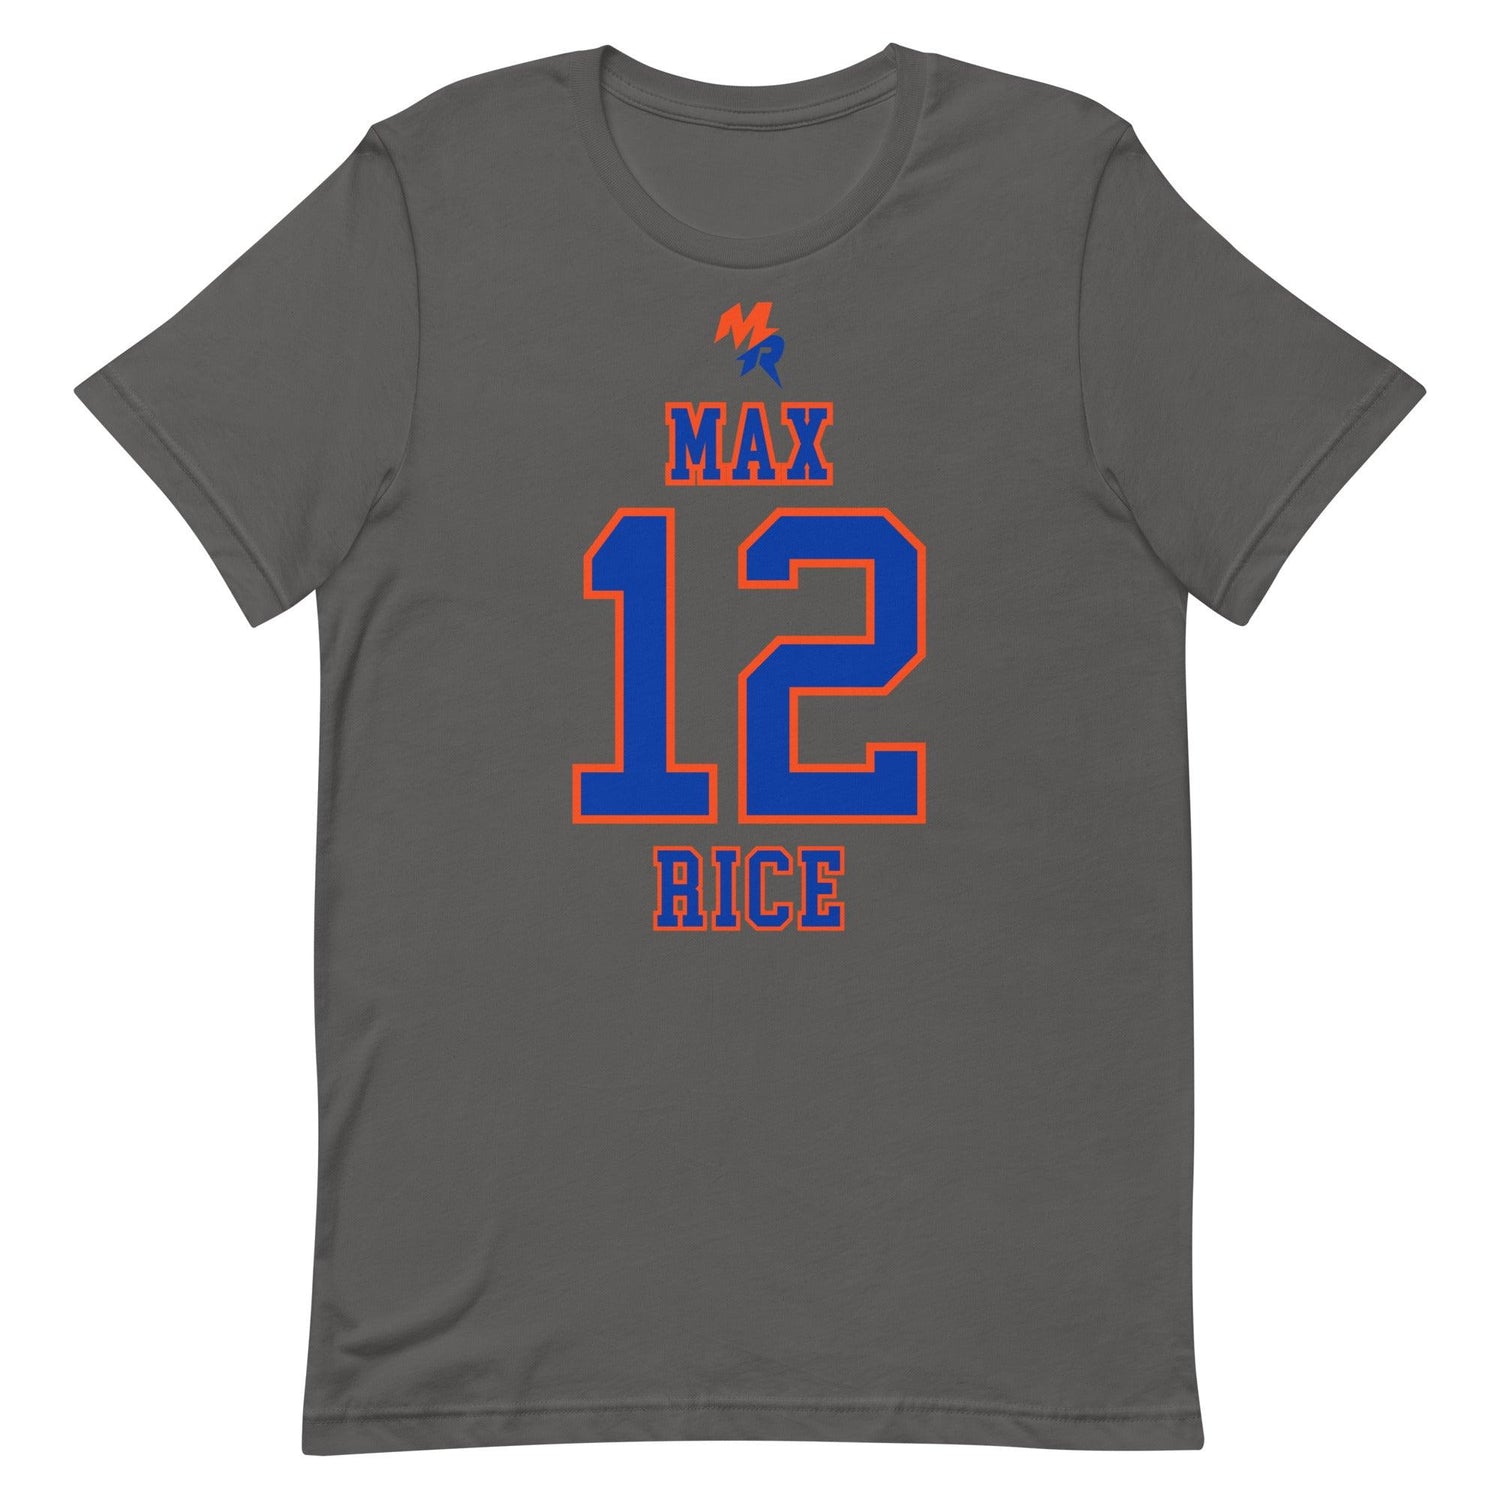 Max Rice "Jersey" t-shirt - Fan Arch